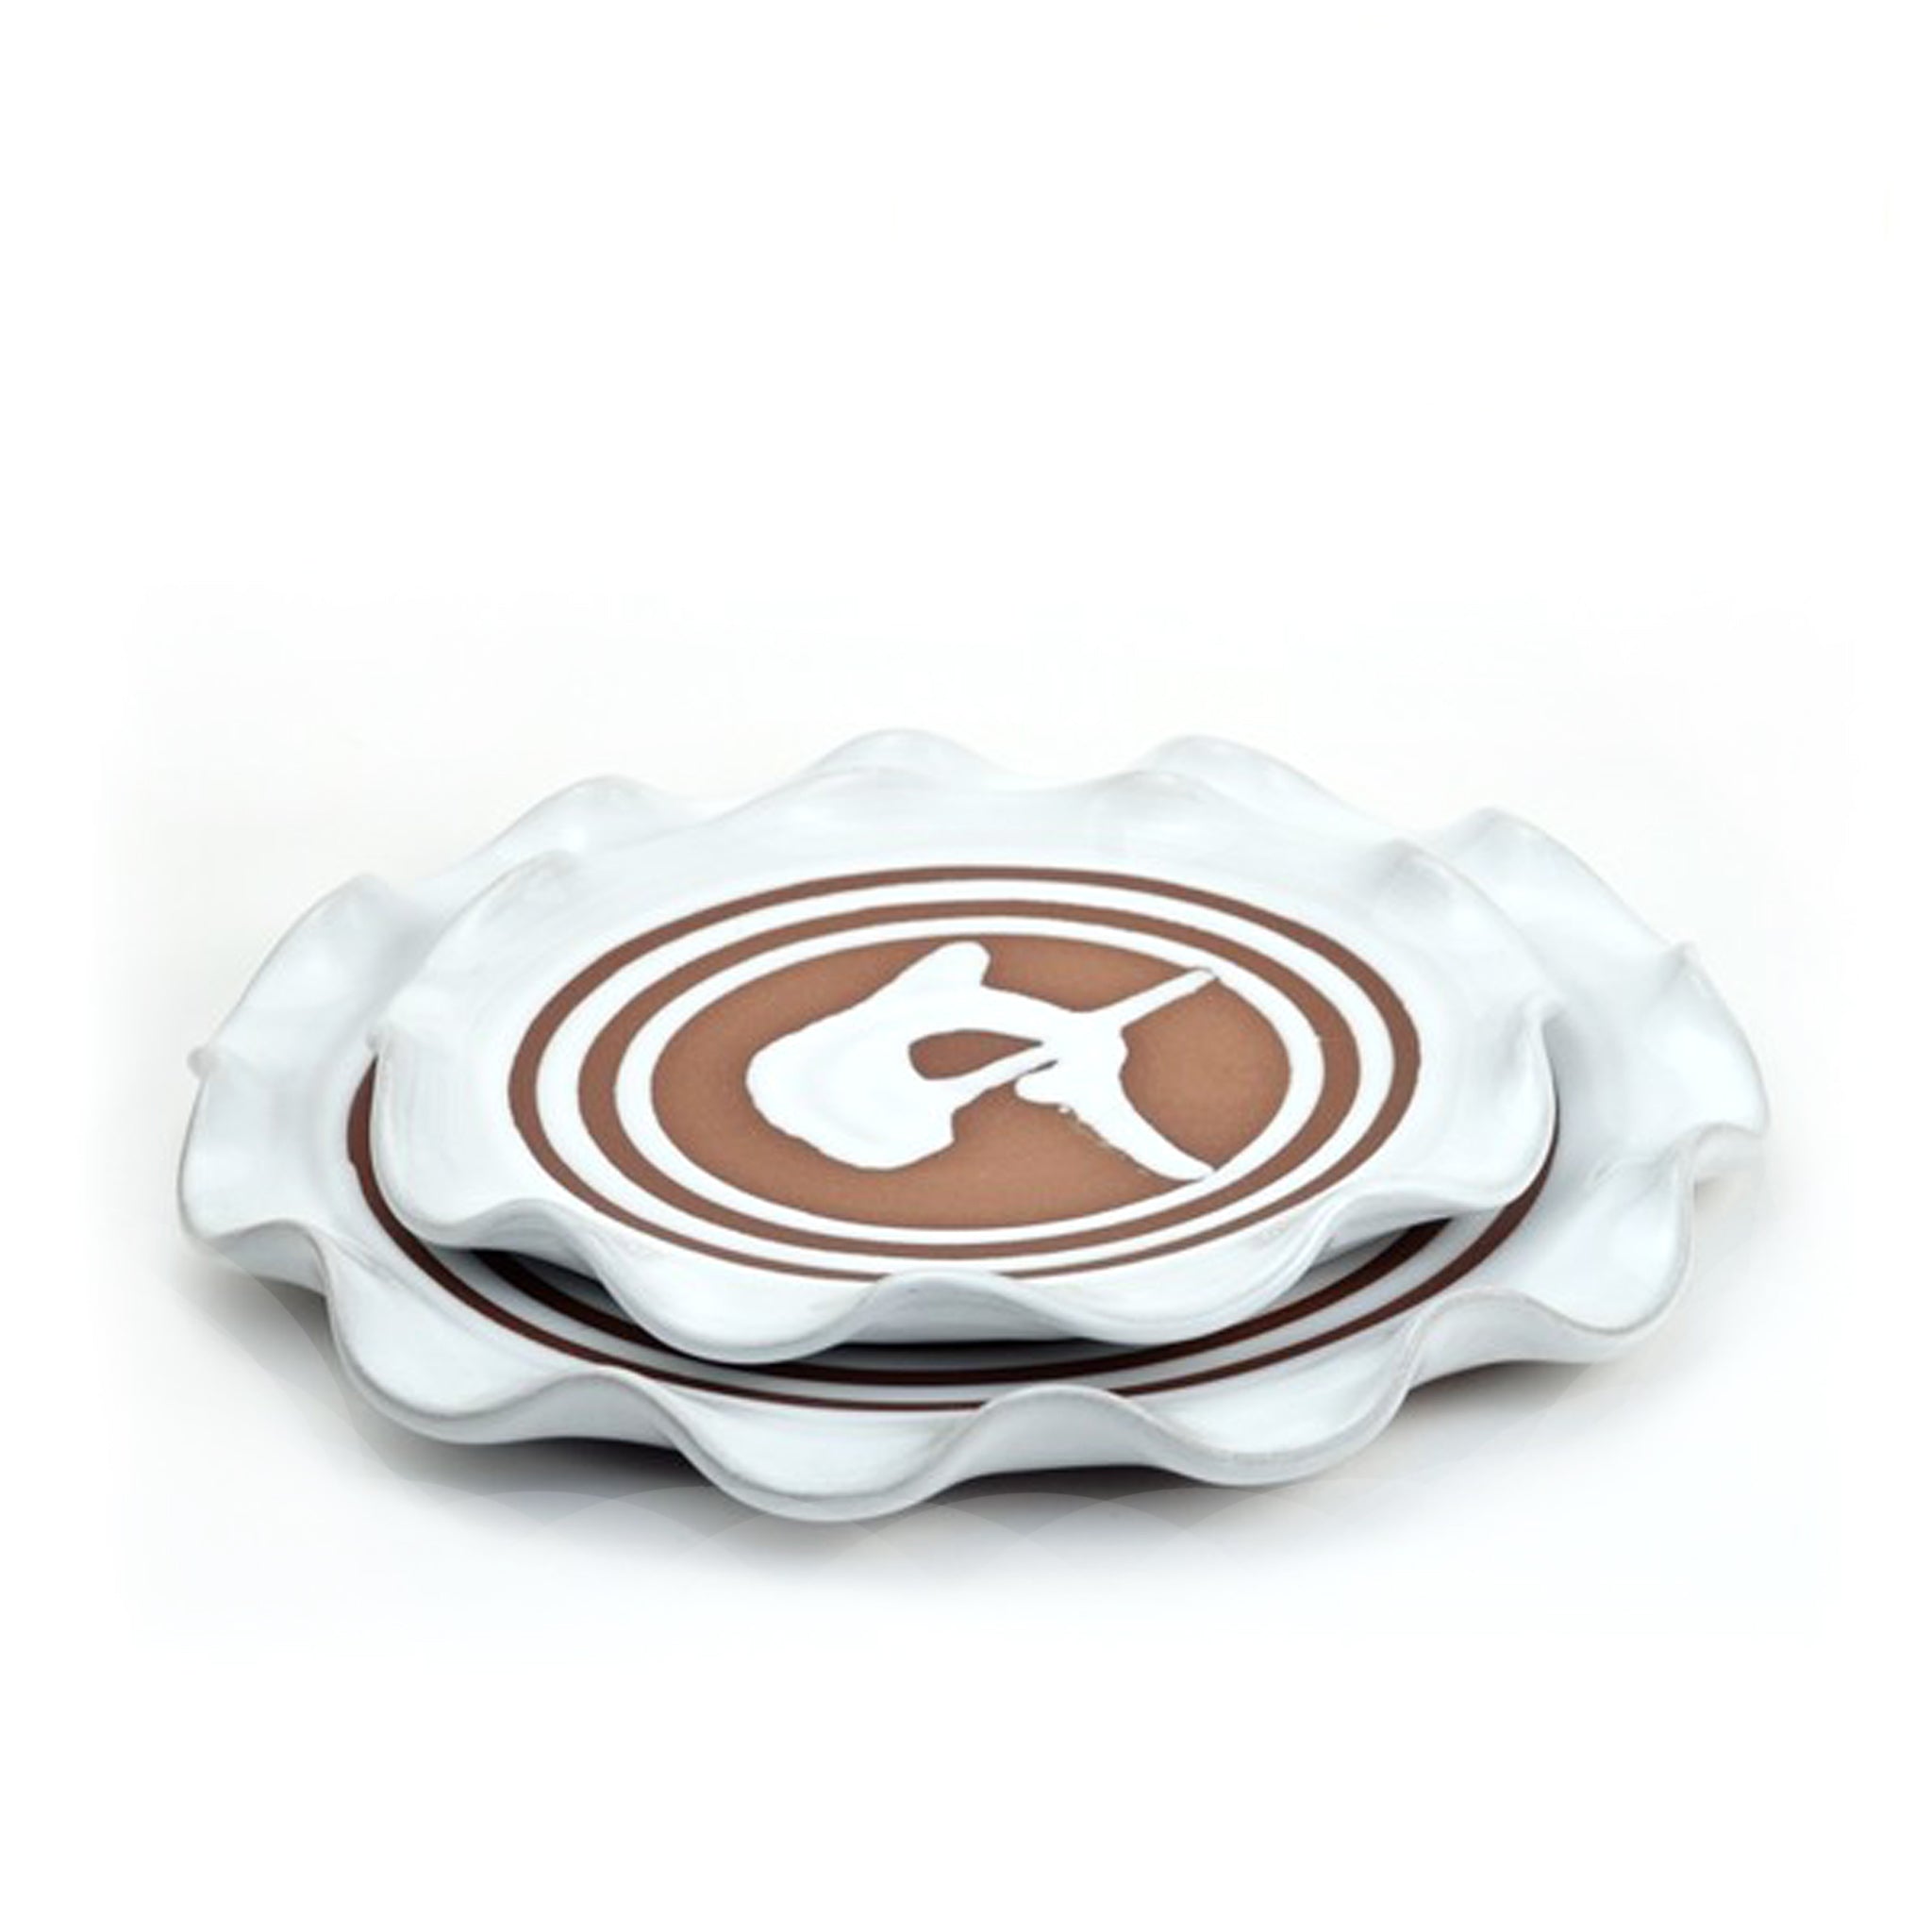 Stephen Pearce Curly Plate Gift Set